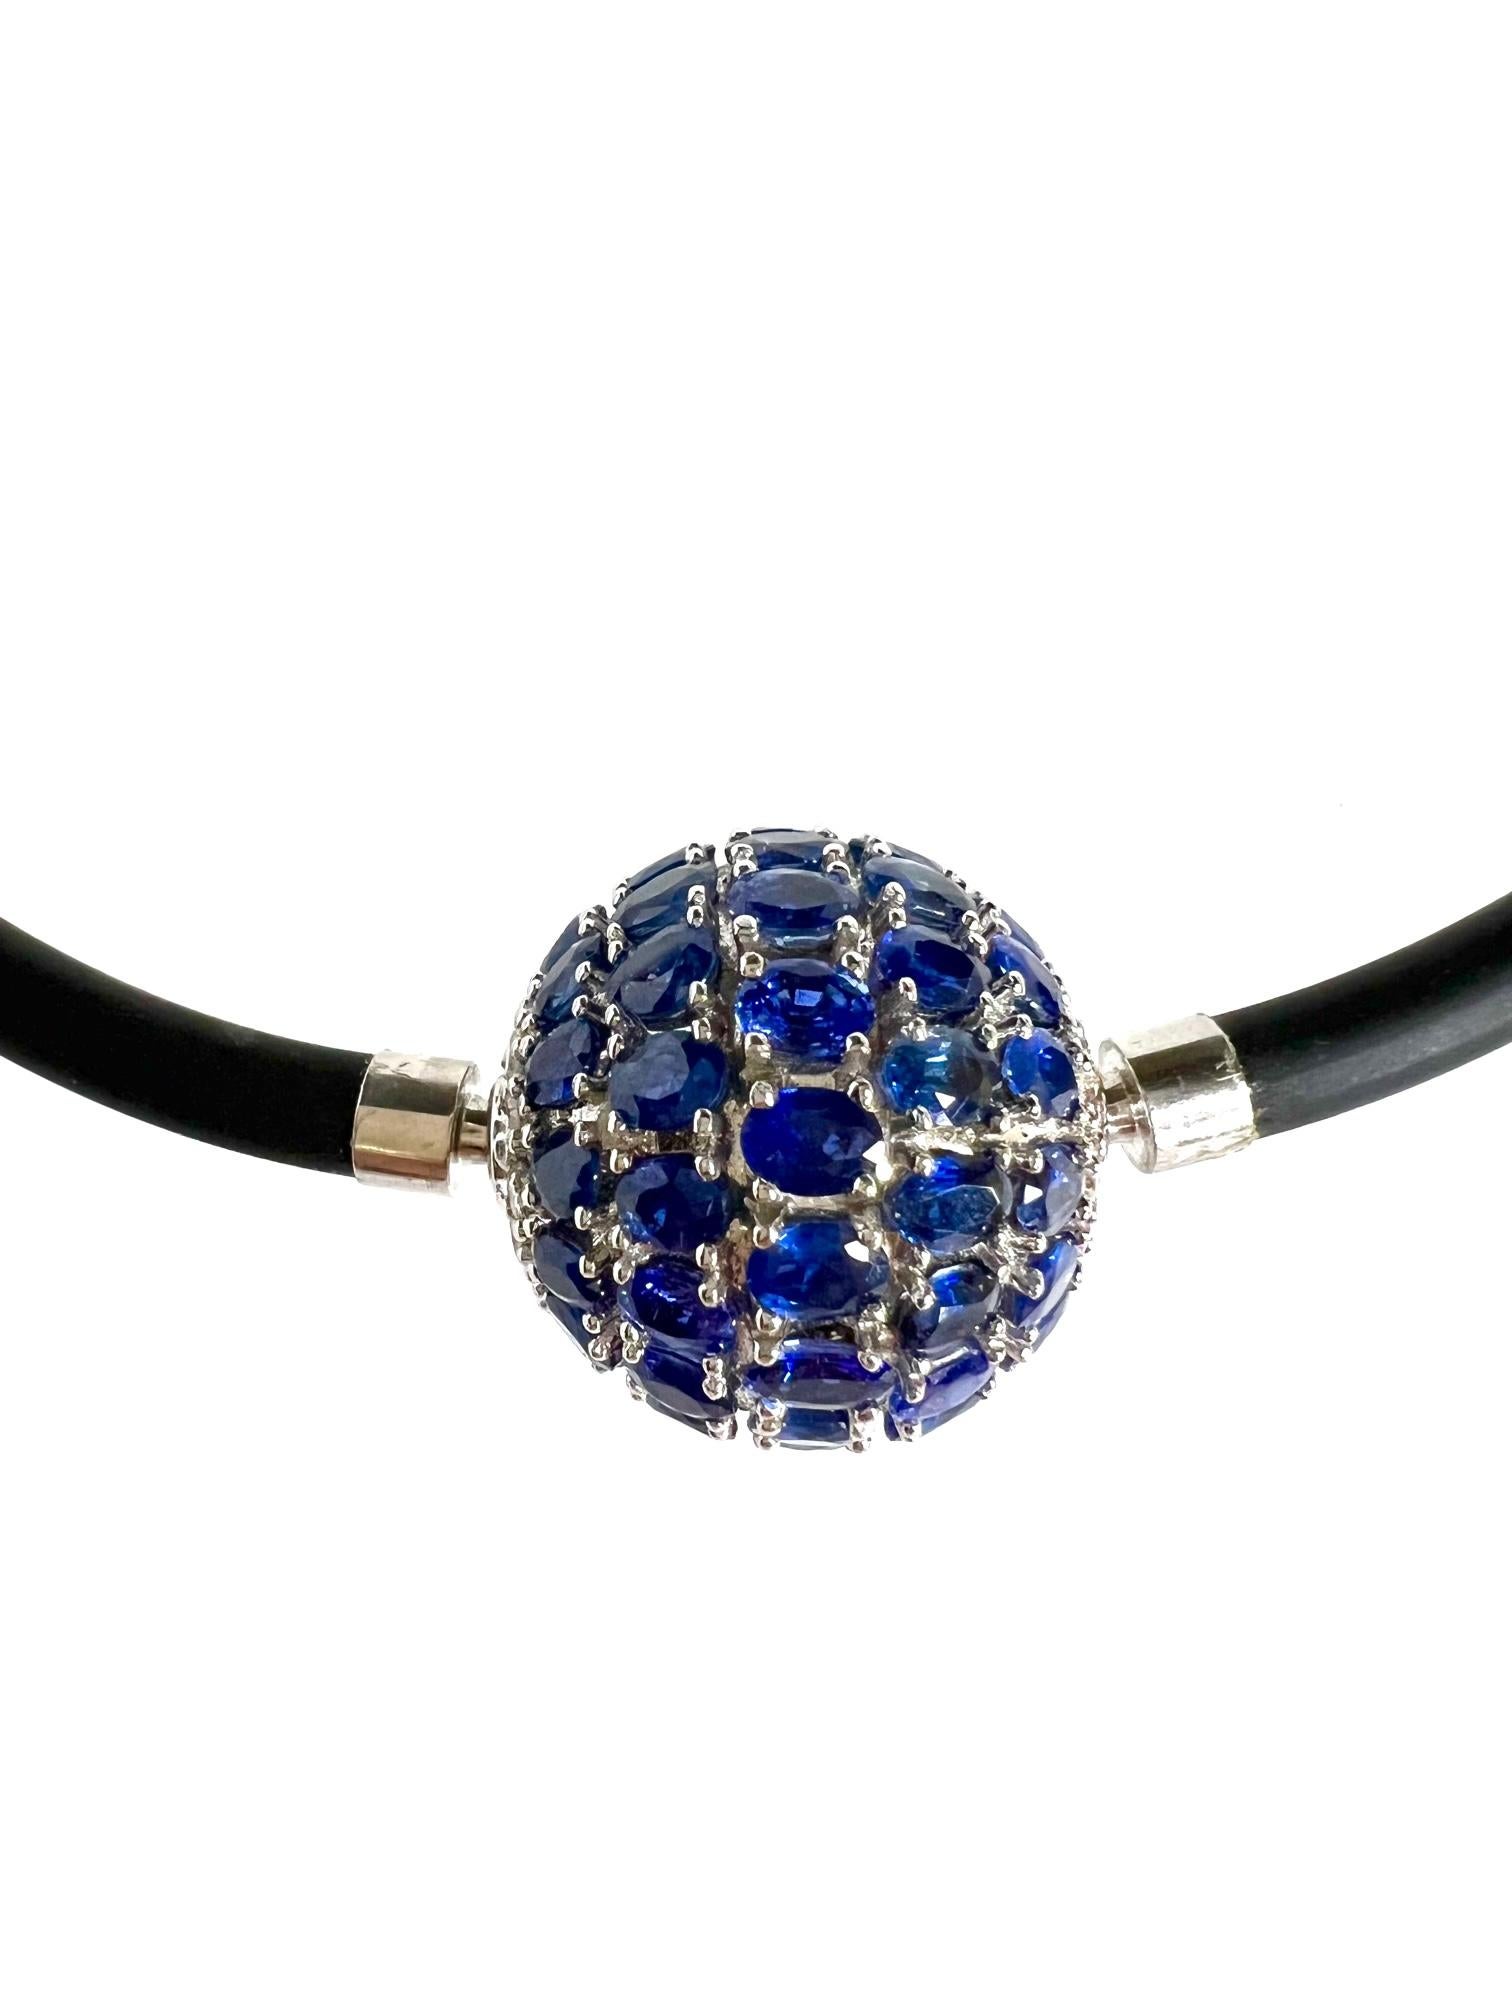 Contemporary Clasp - Pendant in White Gold with Sapphires and Diamonds For Sale